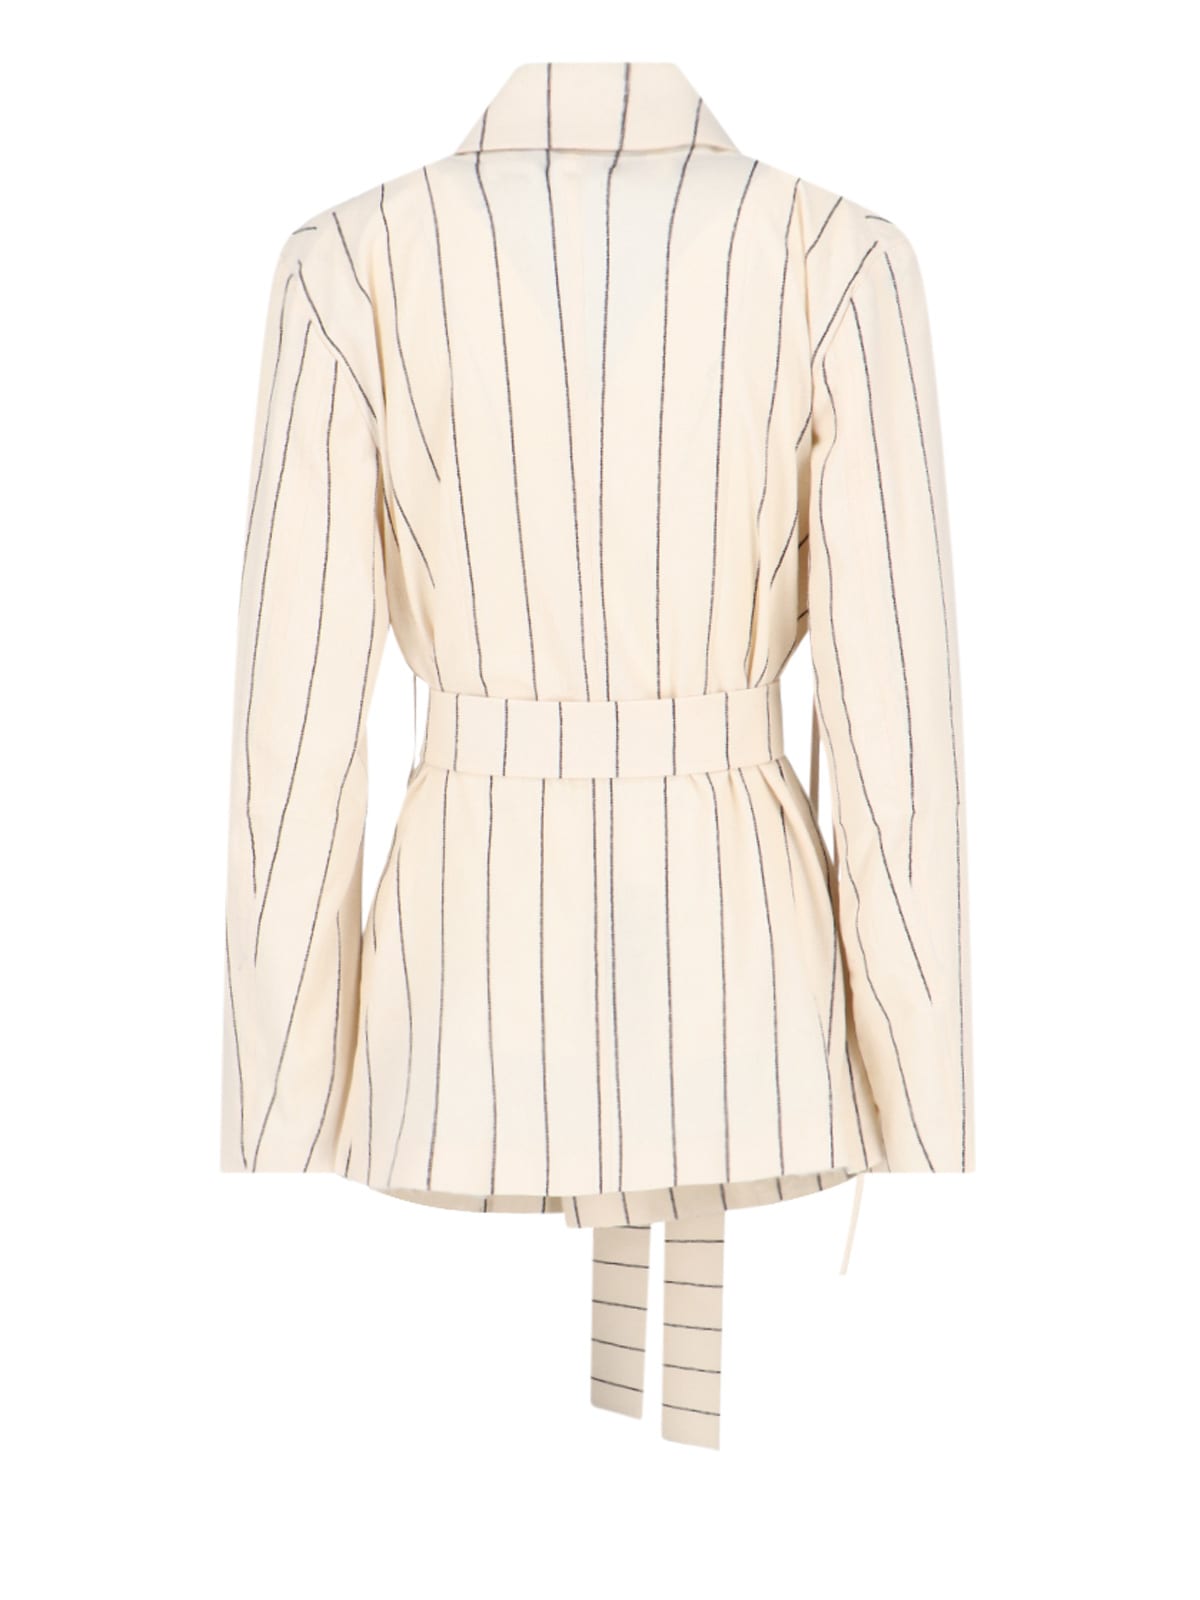 Shop Setchu Pinstriped Double-breasted Blazer In Crema